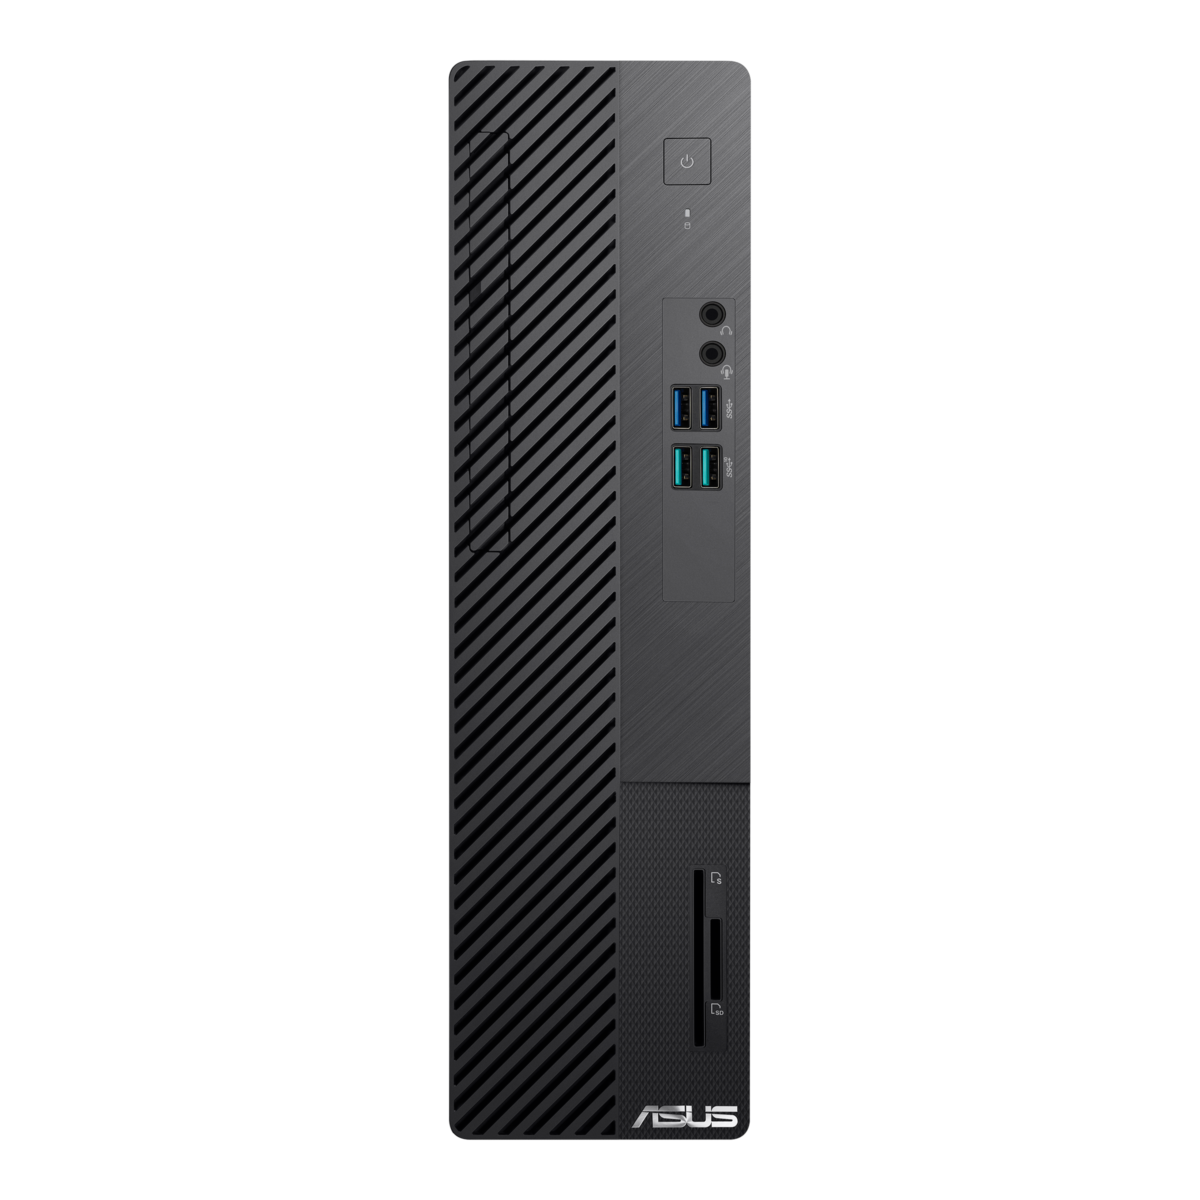 ASUS S500SE, with the latest processors and discrete graphics, maximizes performance in a compact family PC. It offers dual storage, advanced thermal design, AI noise-canceling, and all-solid capacitor build quality.